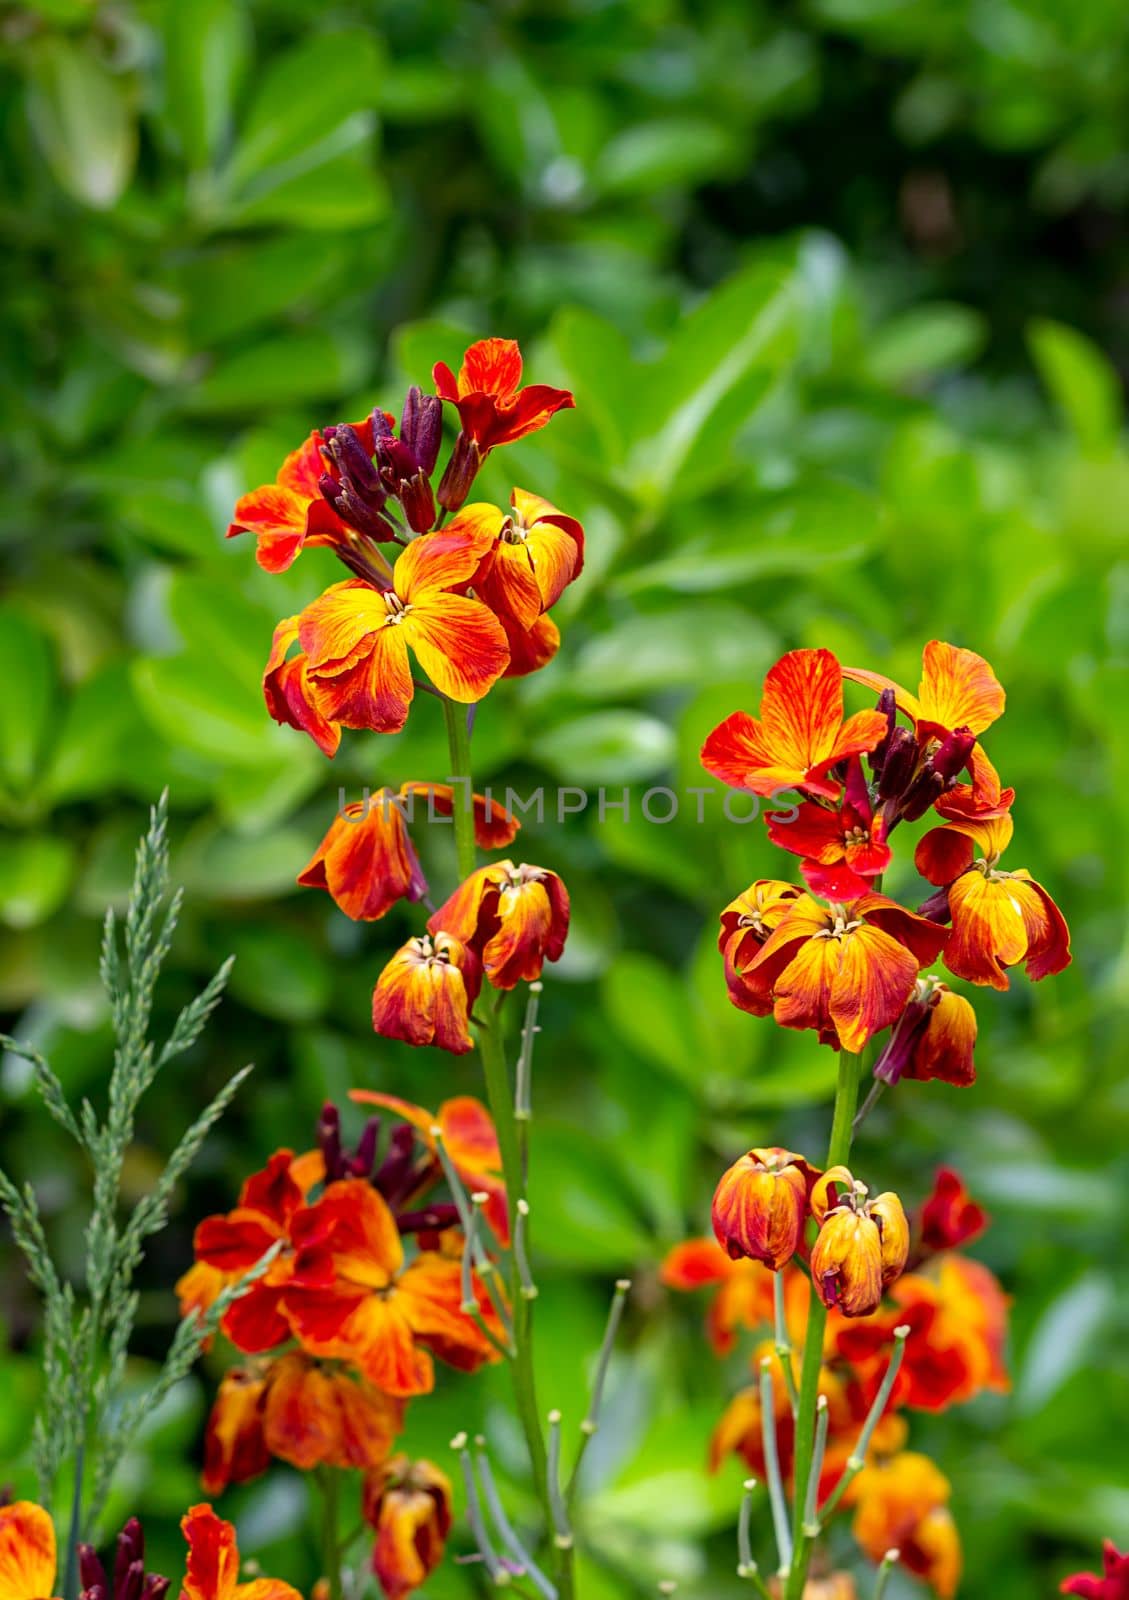 The brightly colored spring flowers of Erysimum cheiri (Cheiranthus) also known as the Wallflower. Vertical view by EdVal